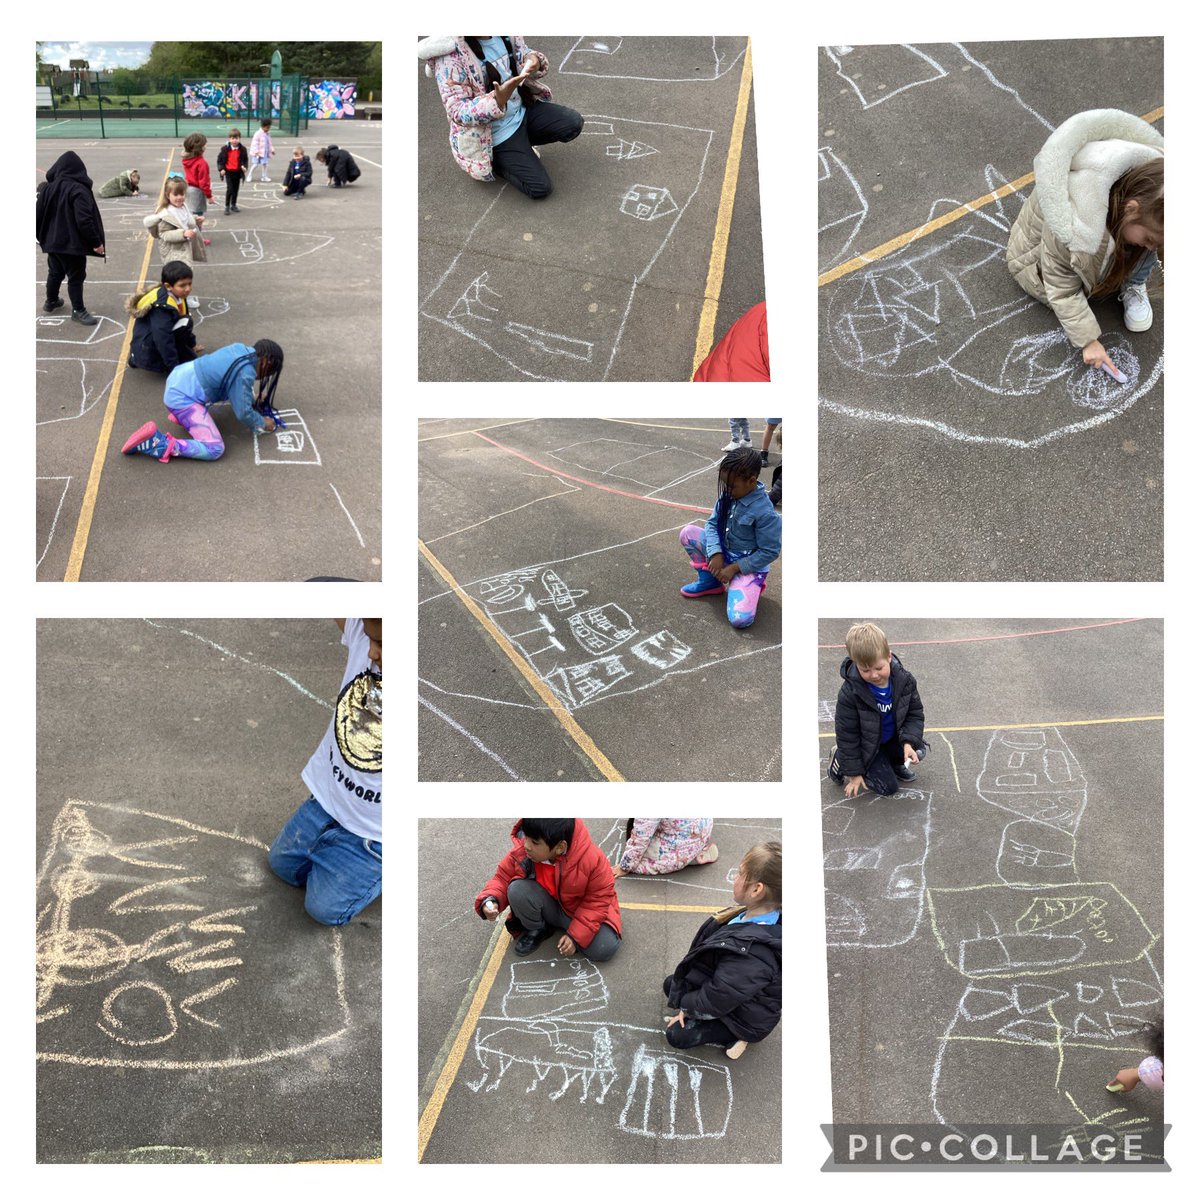 Practising our map skills by drawing key features of our school with chalk! #trynewthings #jcway #year1